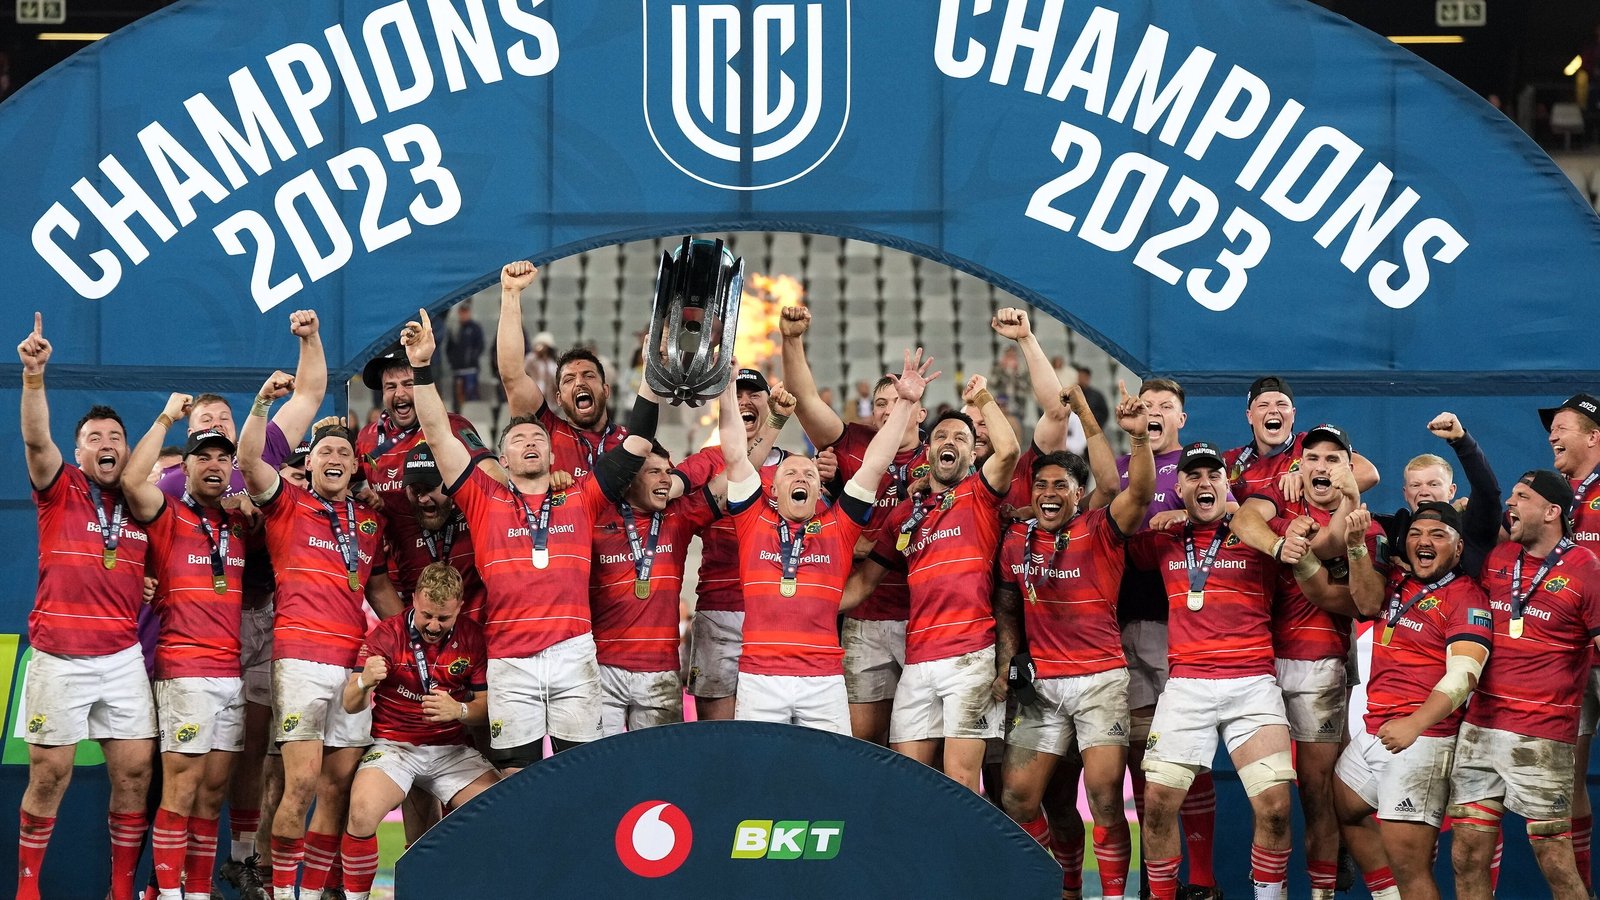 2023/24 Championship Fixtures Announced - Coventry Rugby